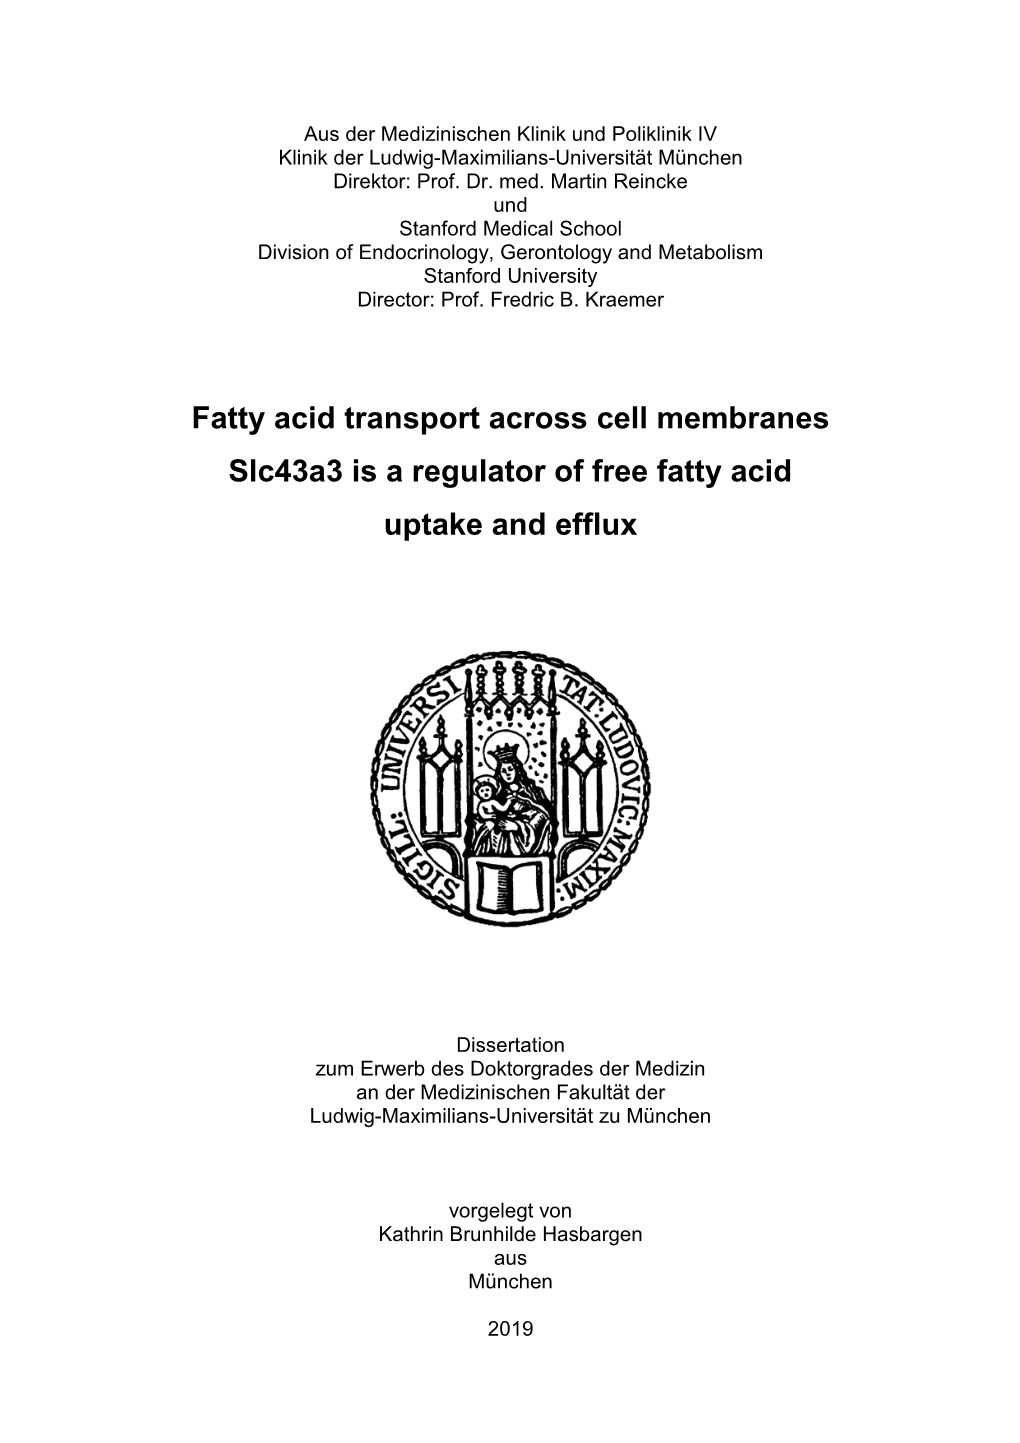 Fatty Acid Transport Across Cell Membranes Slc43a3 Is a Regulator of Free Fatty Acid Uptake and Efflux